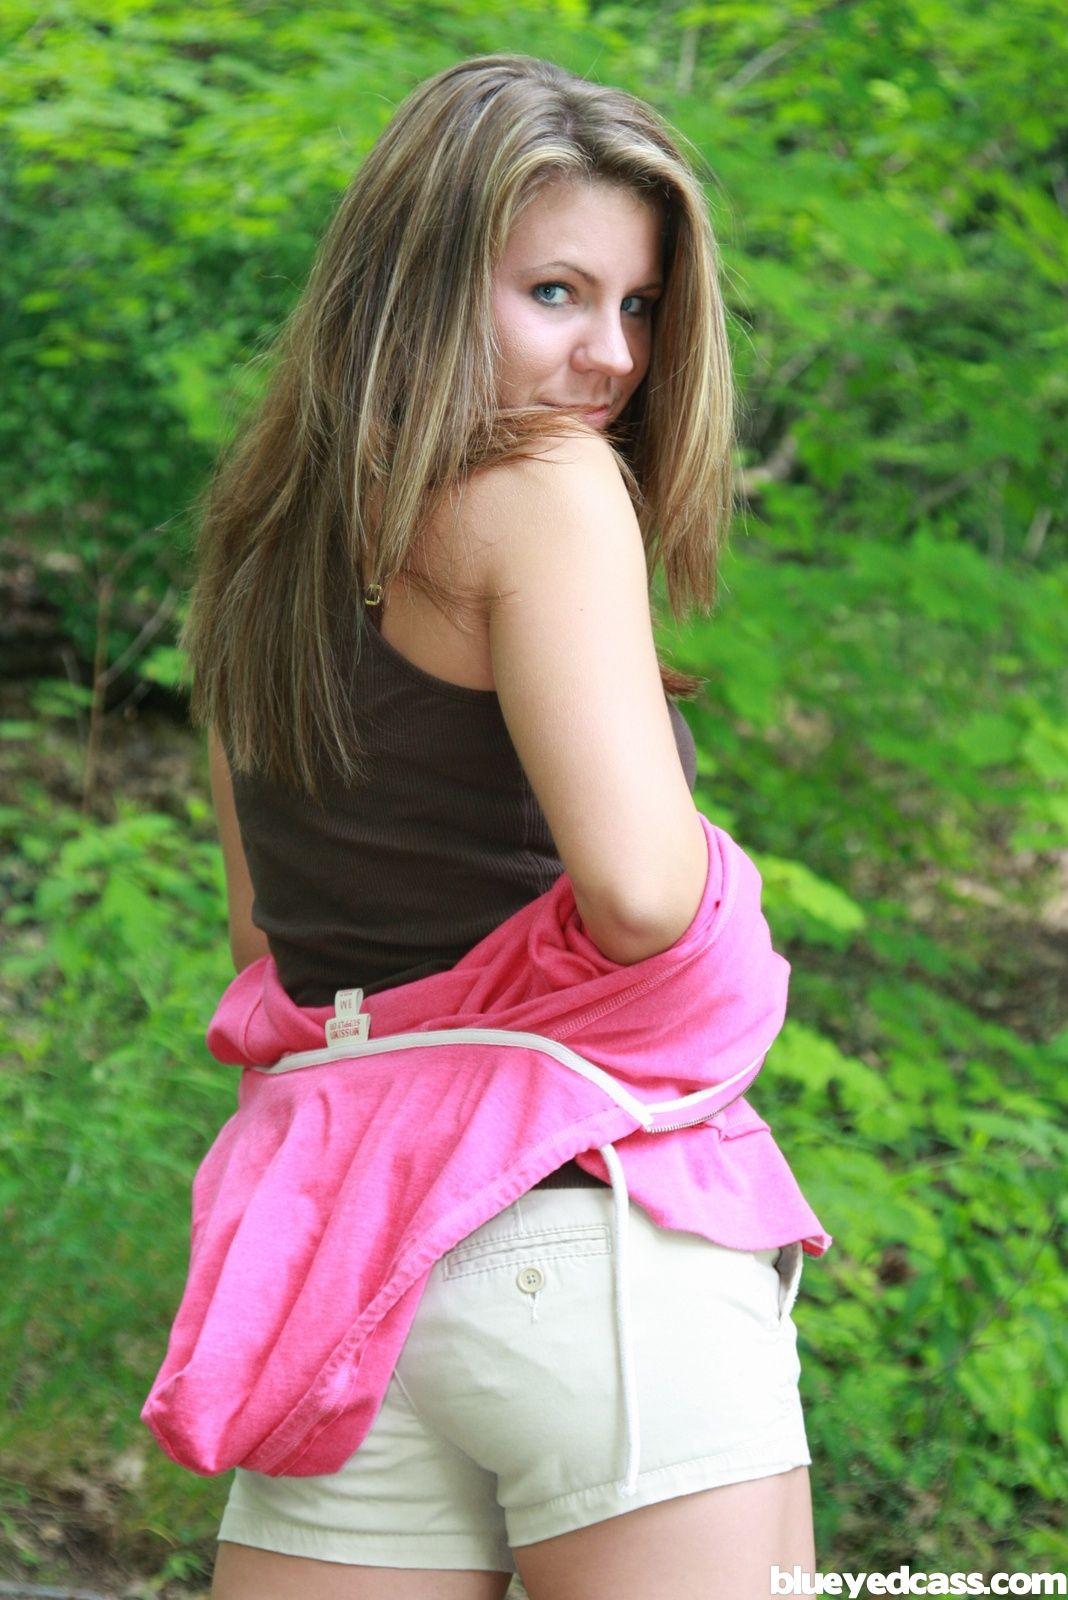 Pictures of teen Blueyed Cass stripping on her hike #53456981